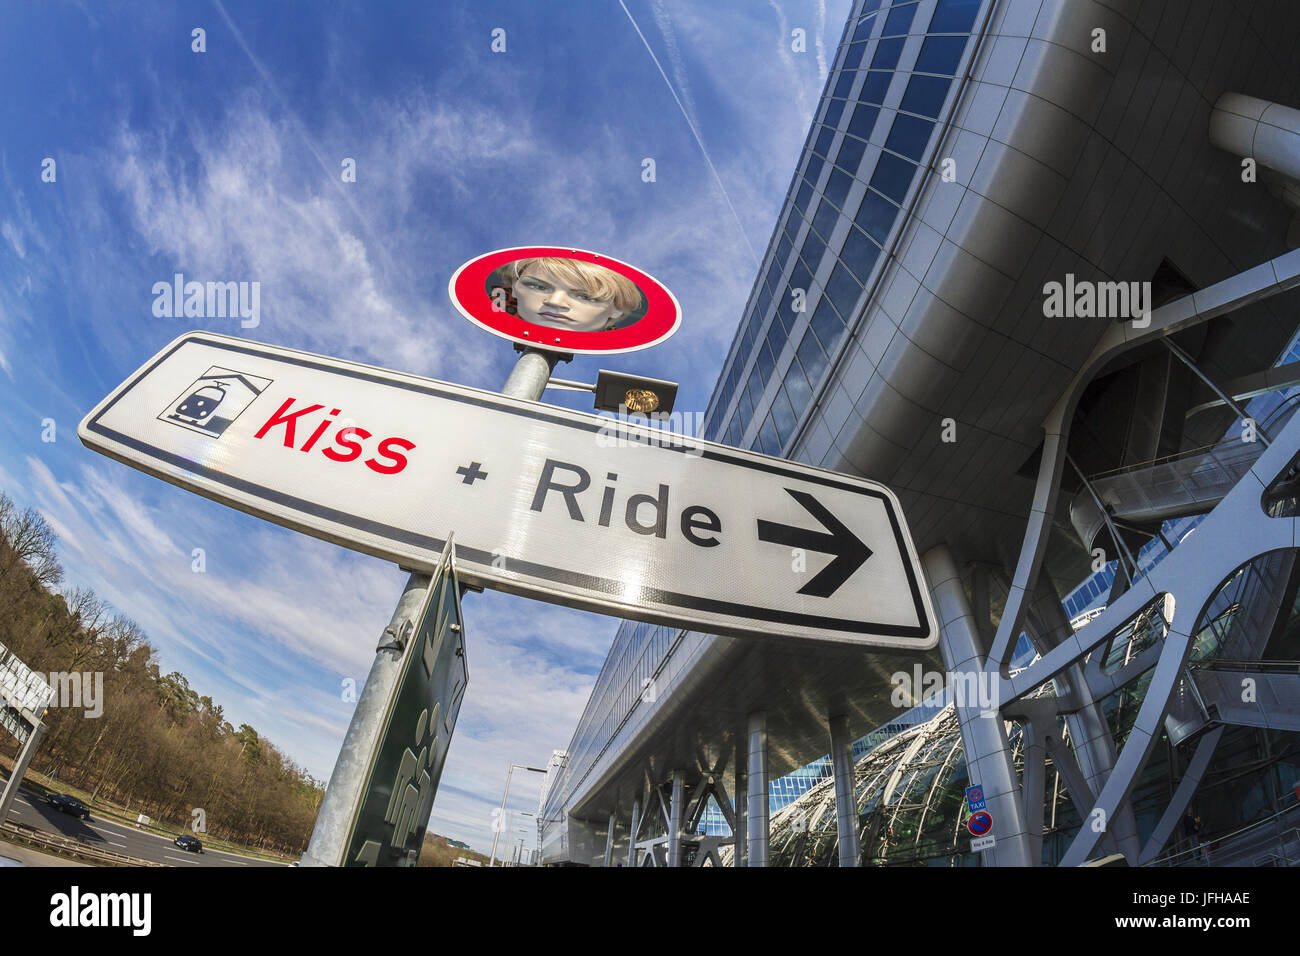 Kiss and Ride Stock Photo